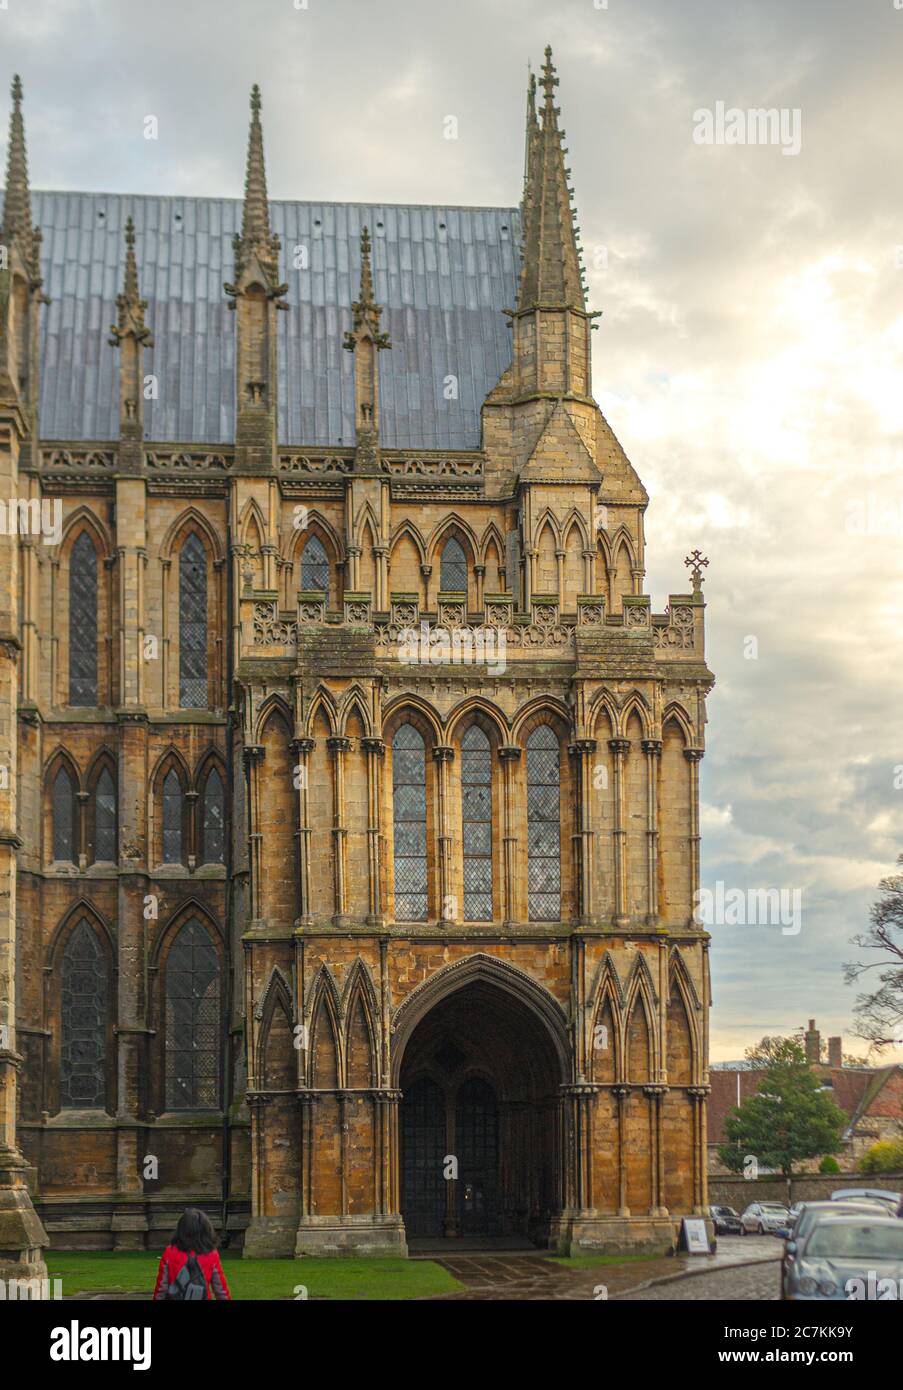 Beautiful view of the Lincoln Cathedral in the UK on a rainy day Stock Photo